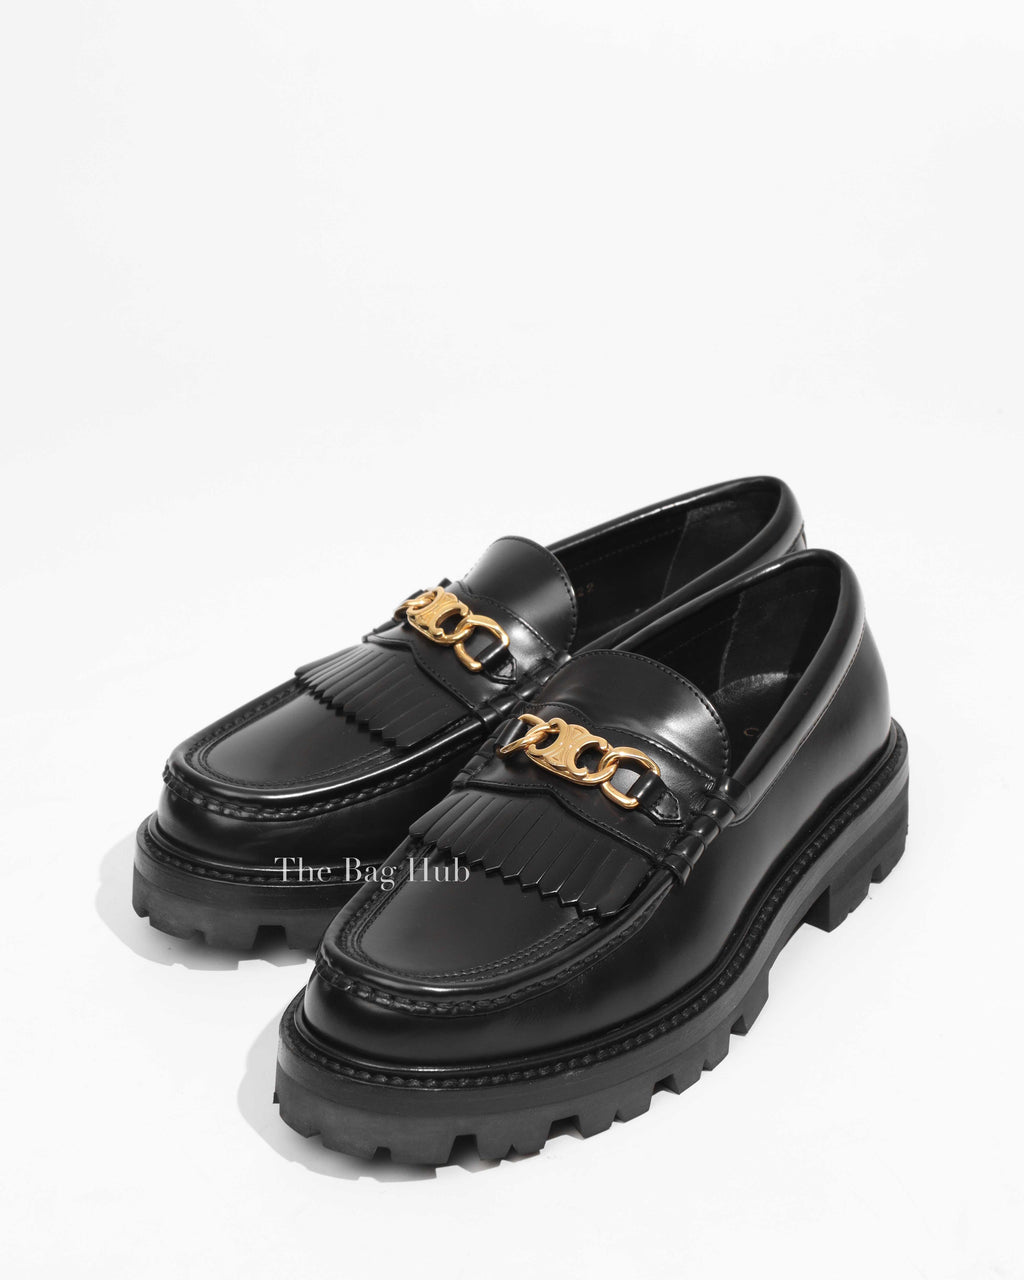 Celine Black Margaret with Triomphe chain in Polished Bull Women's Loafer Size 37